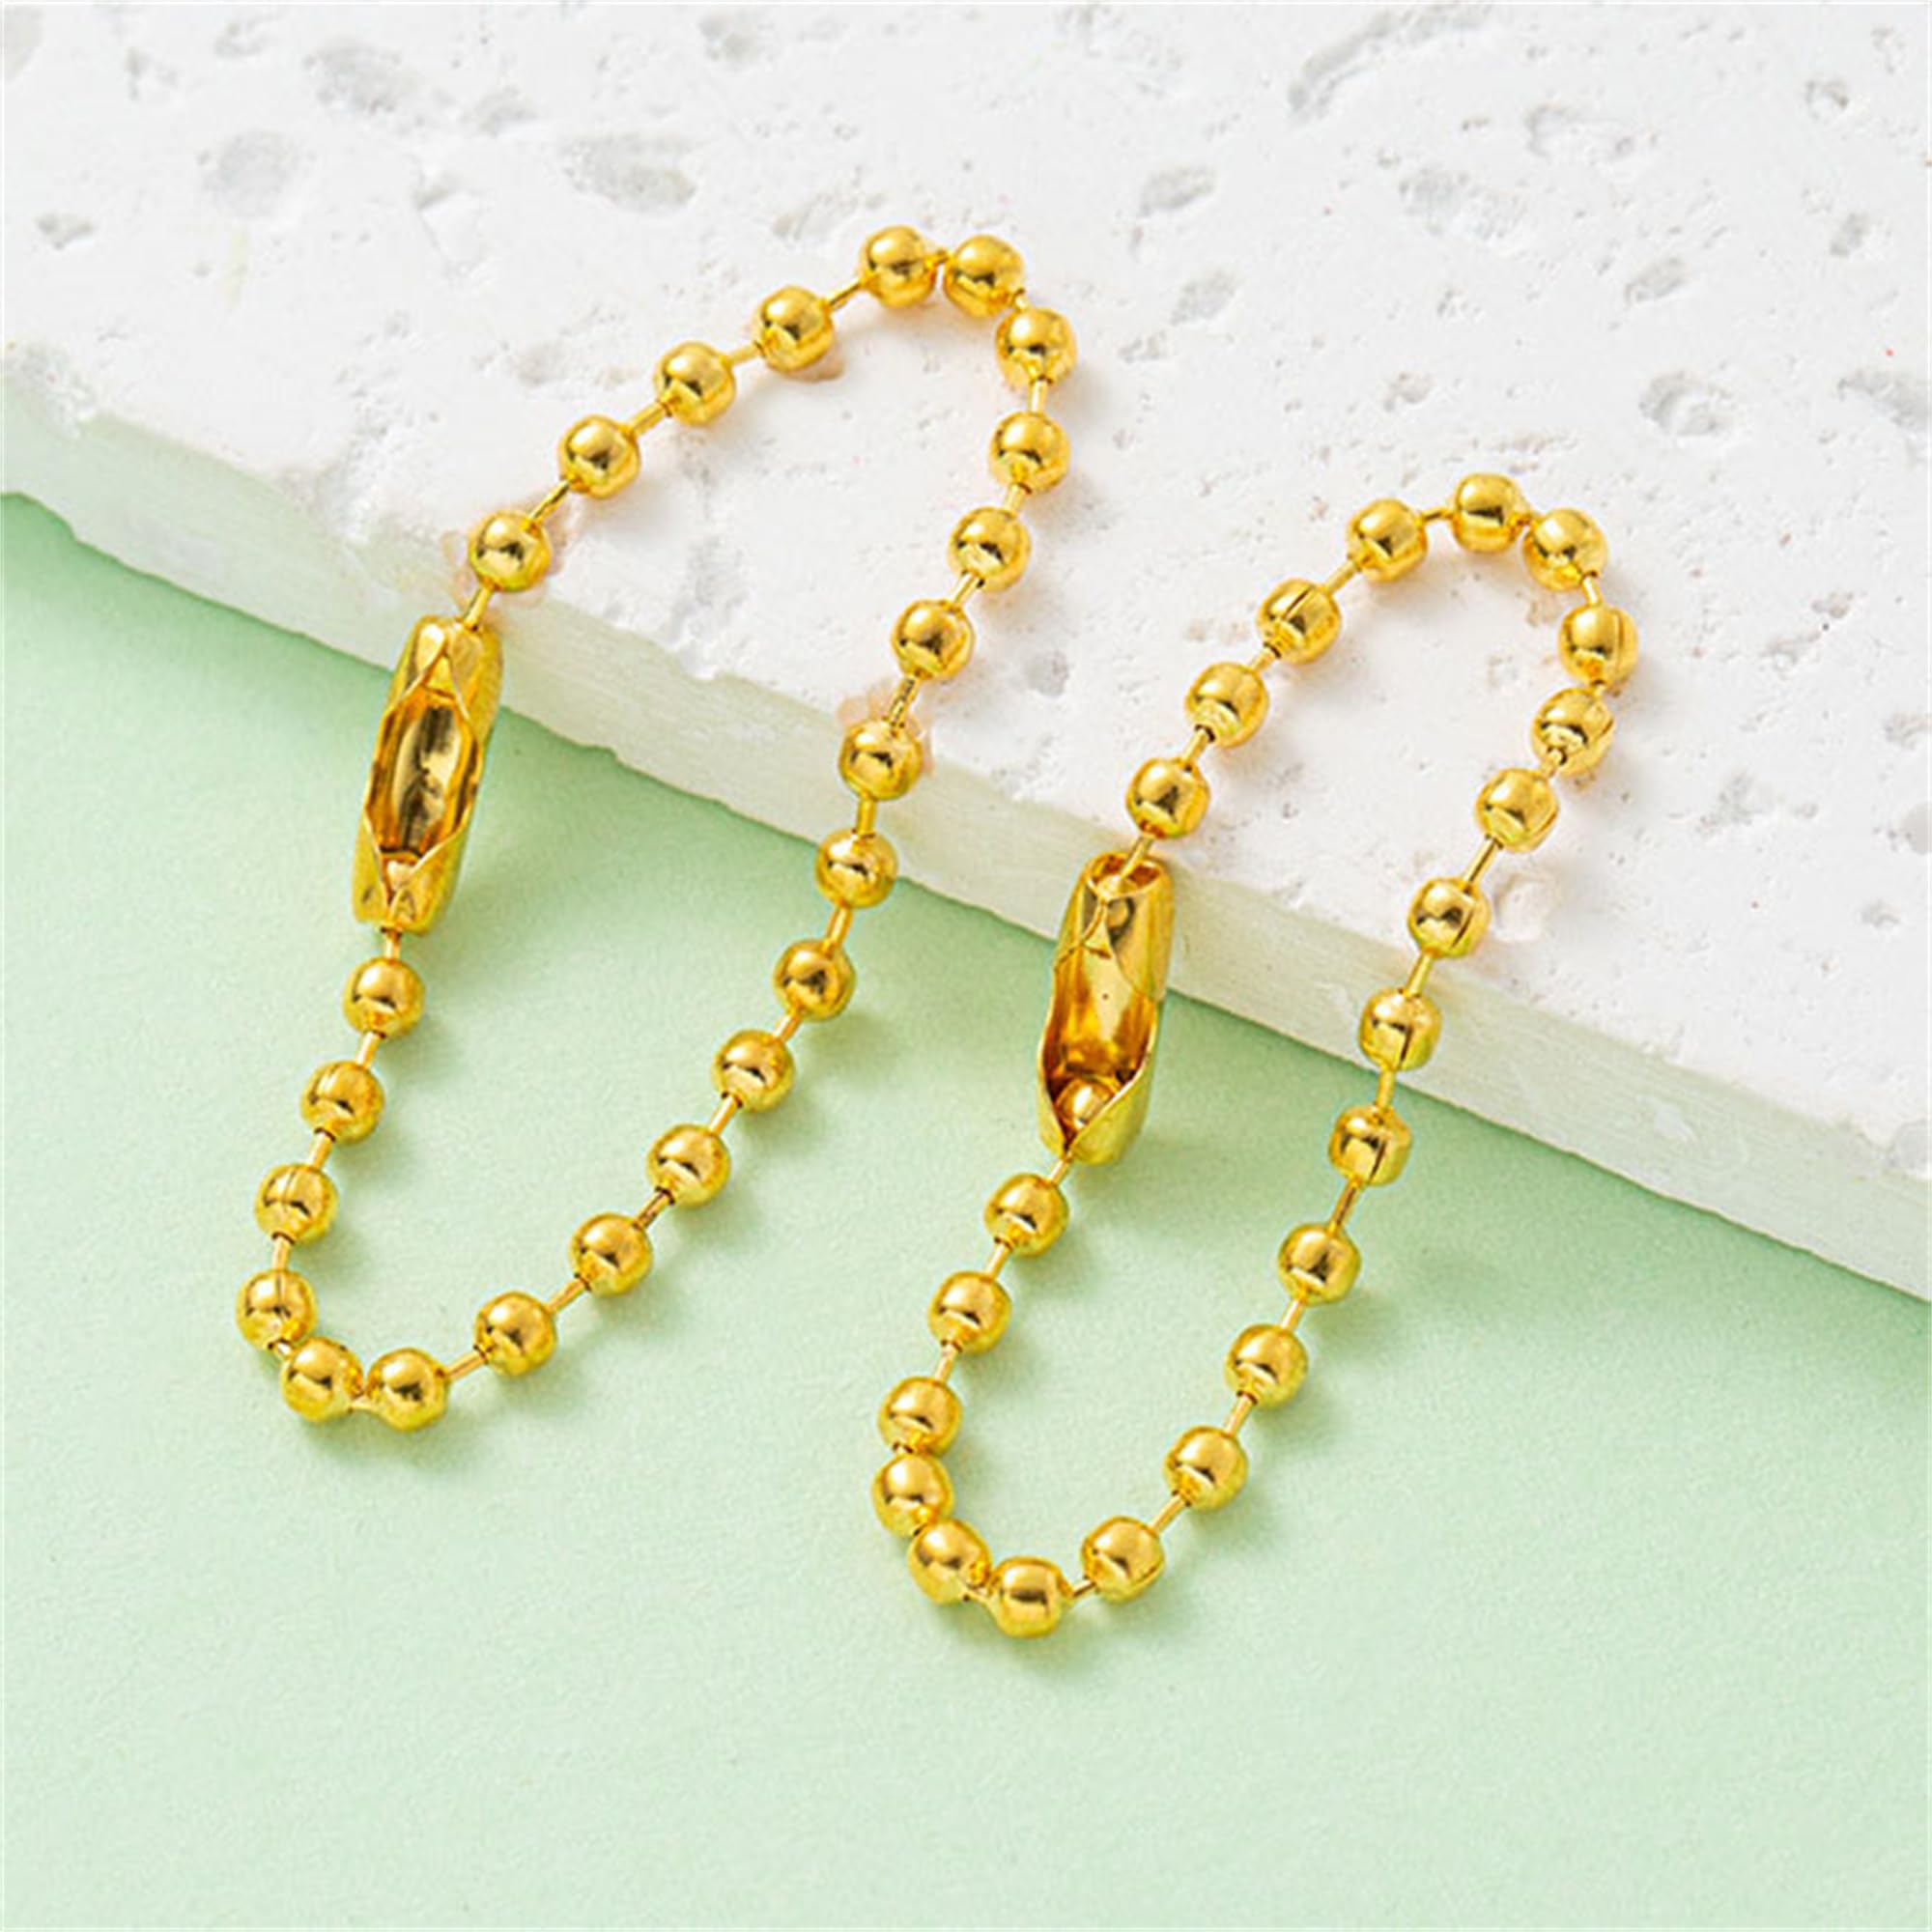 2 Rolls Durable Metal Ball Chains 2.4mm Dog Tag Bead Chain Gold and Silver Necklace Keychains Jewellery Crafts 30 Feets per Spool